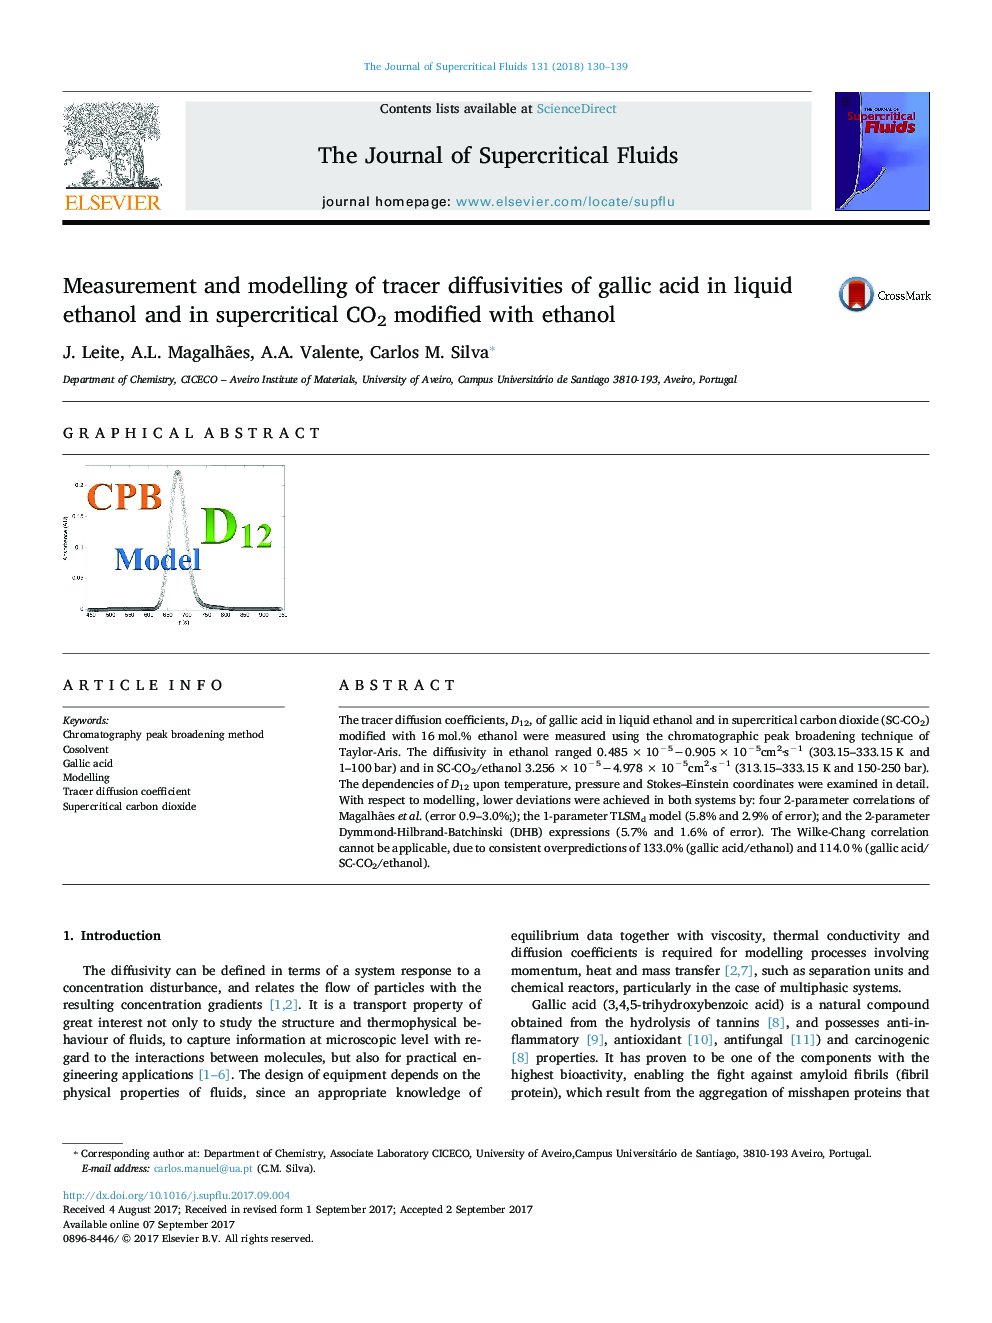 Measurement and modelling of tracer diffusivities of gallic acid in liquid ethanol and in supercritical CO2 modified with ethanol